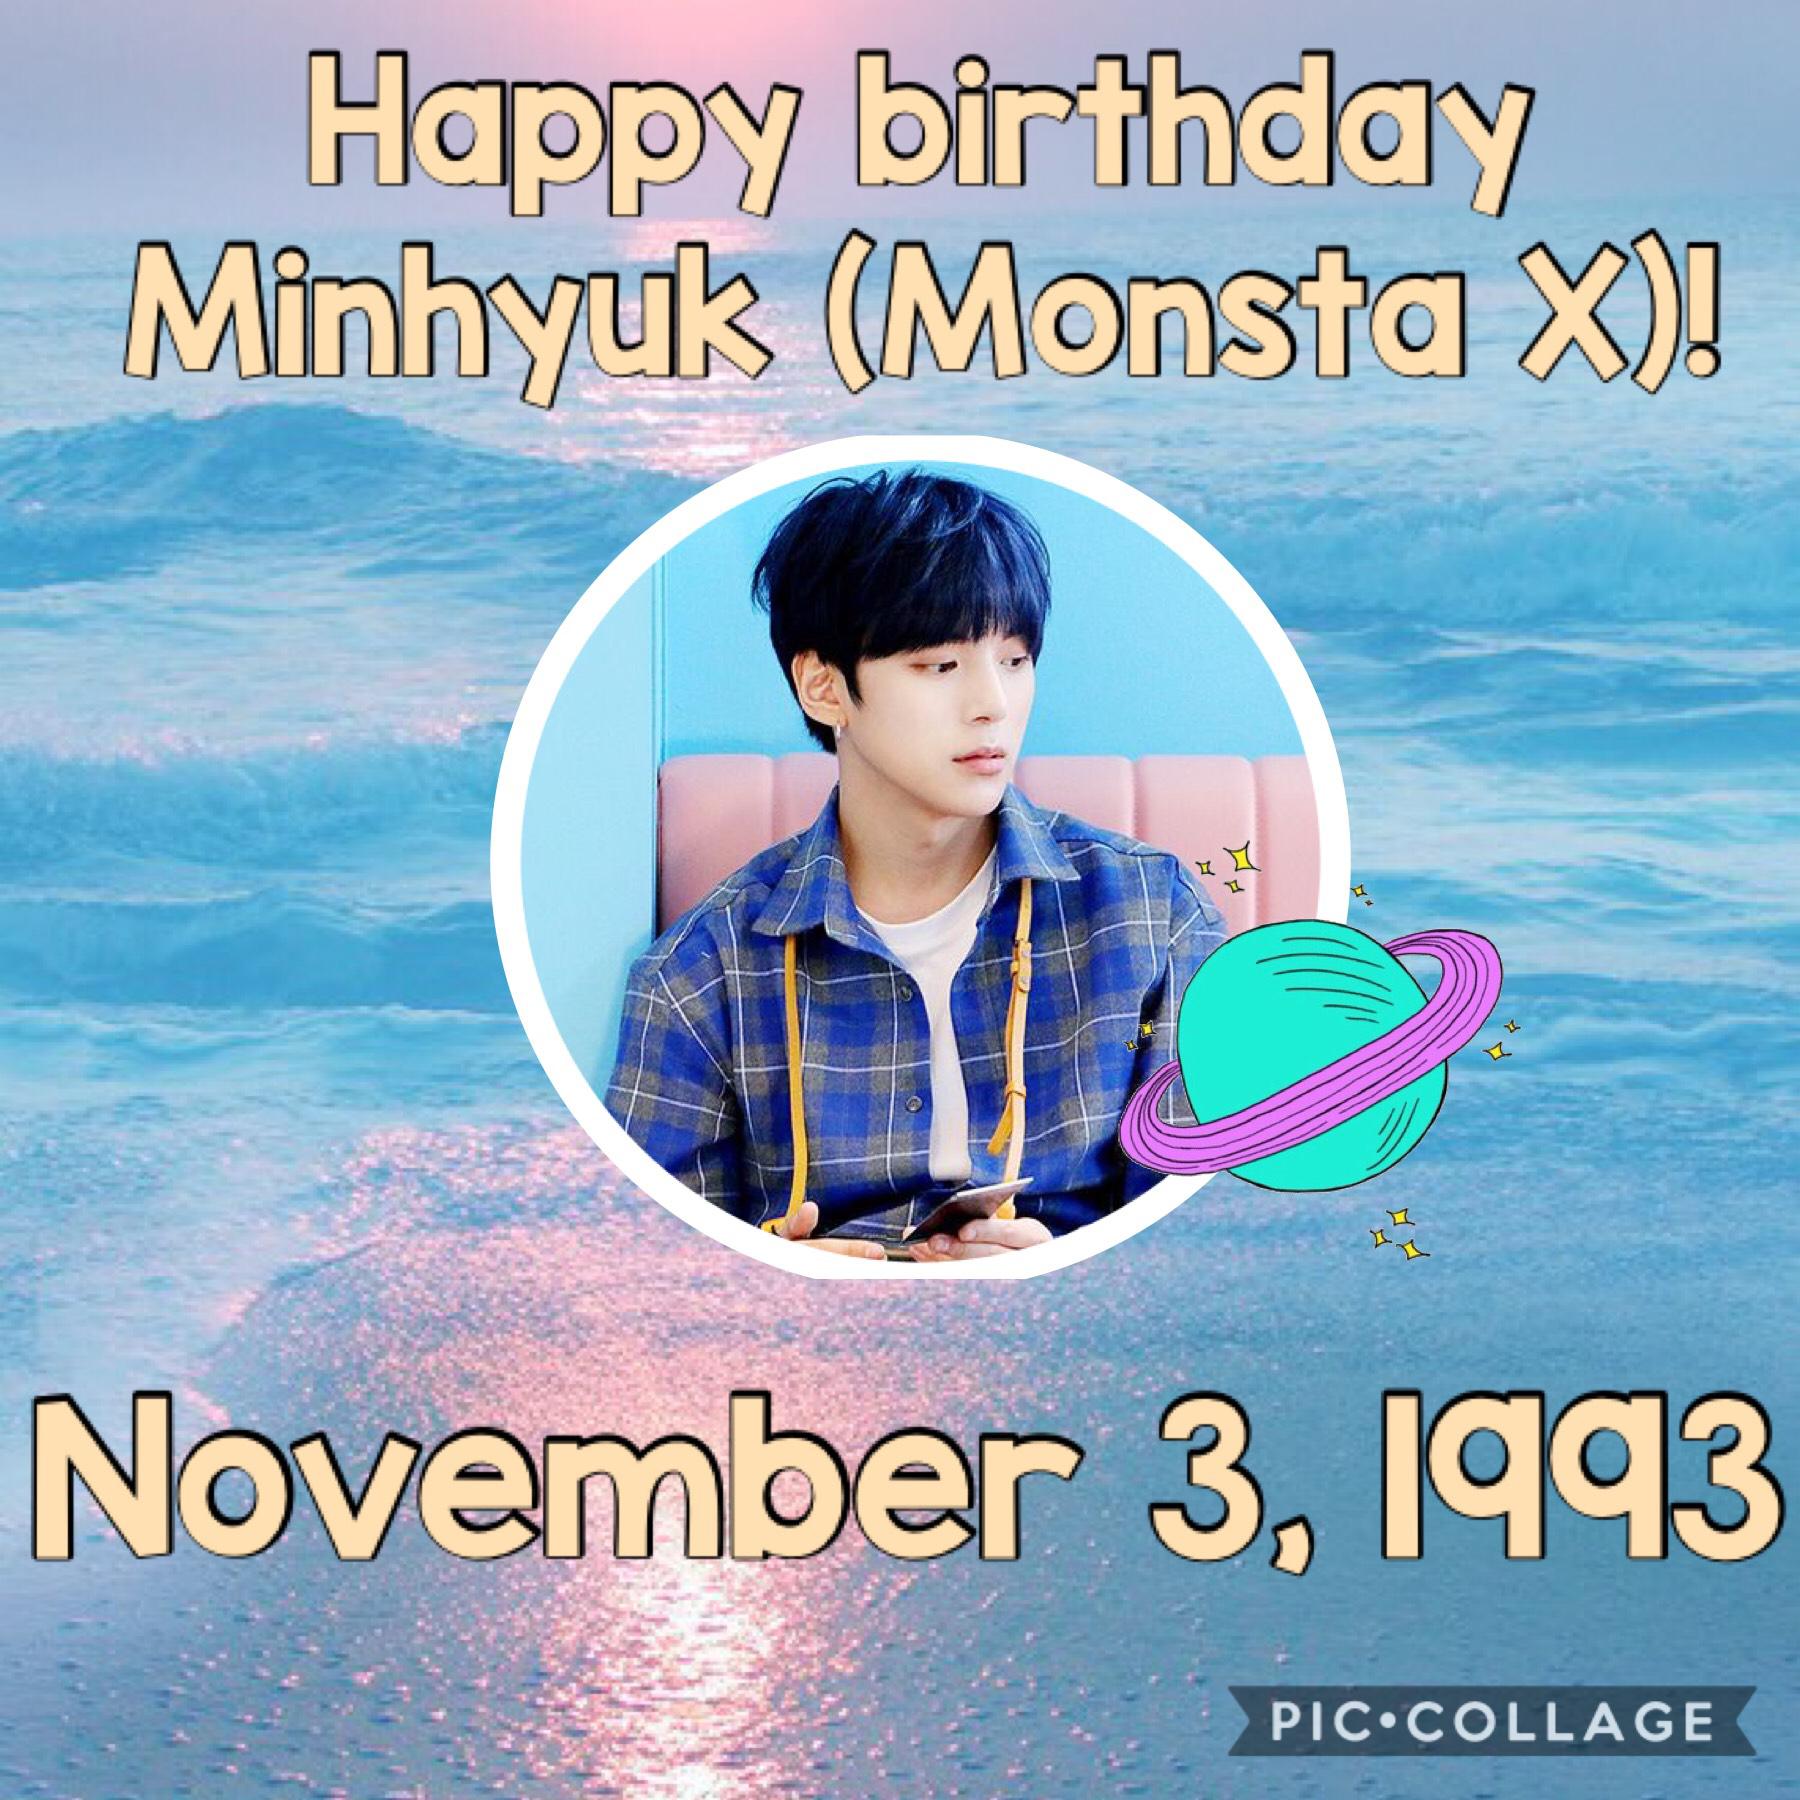 •Lee Minhyuk•
Happy birthday!! Omggg I’m so proud of Monsta X they got their 3rd (or was it 4th sHOOT DONT remember) win! AhhhhhhHhhhhhHhhHhhh
Love and Stan Monsta X please~ they have a 😎😎😎❤️❤️ concept but 🍭🍫🍰🎂😂😂😂 personalities lol
~Whoop